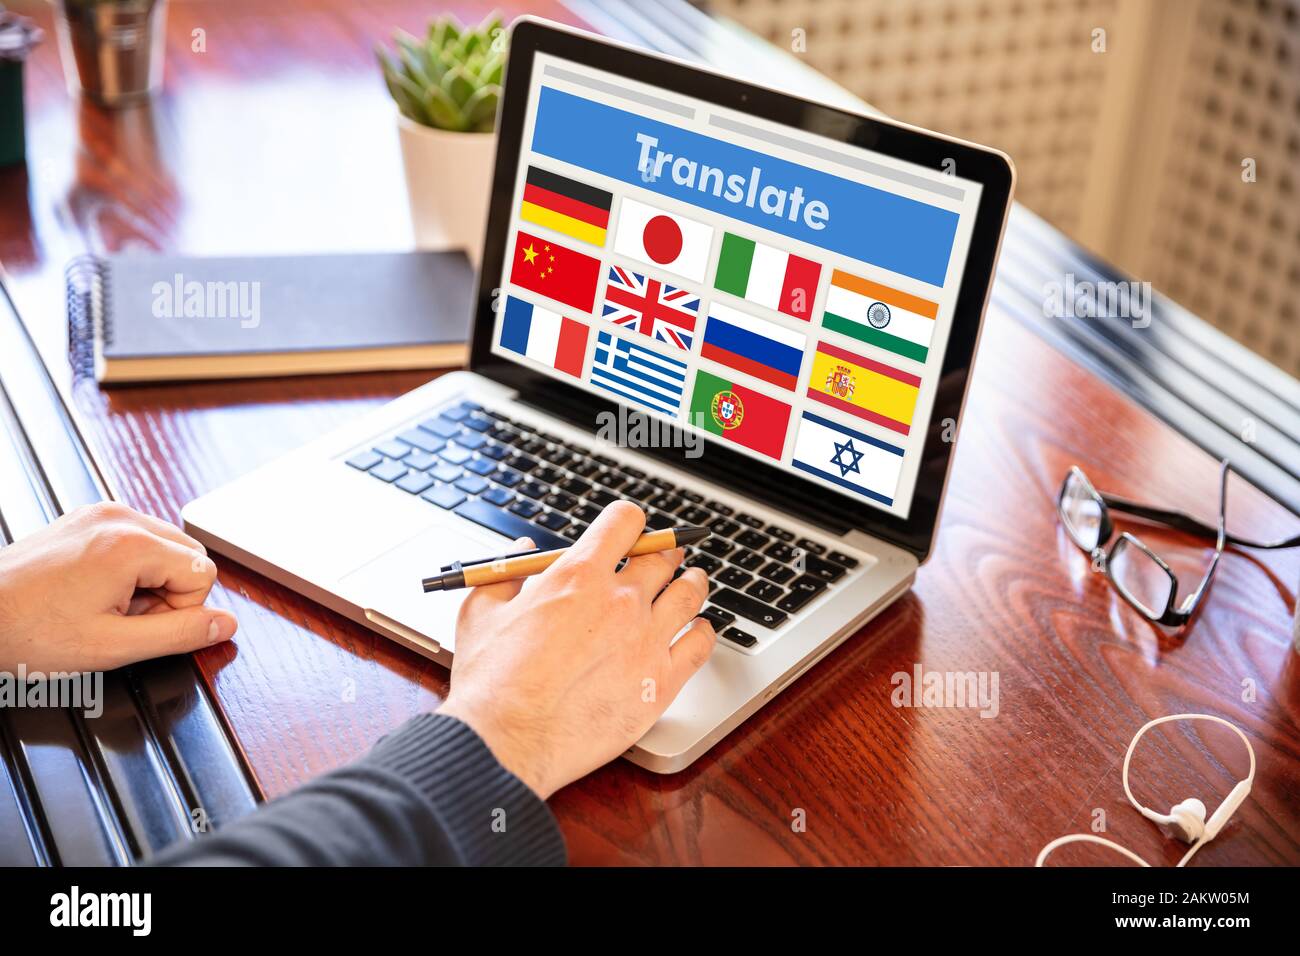 Online translation, foreign languages learning concept. Man working with a computer laptop, translate text on the screen. Stock Photo